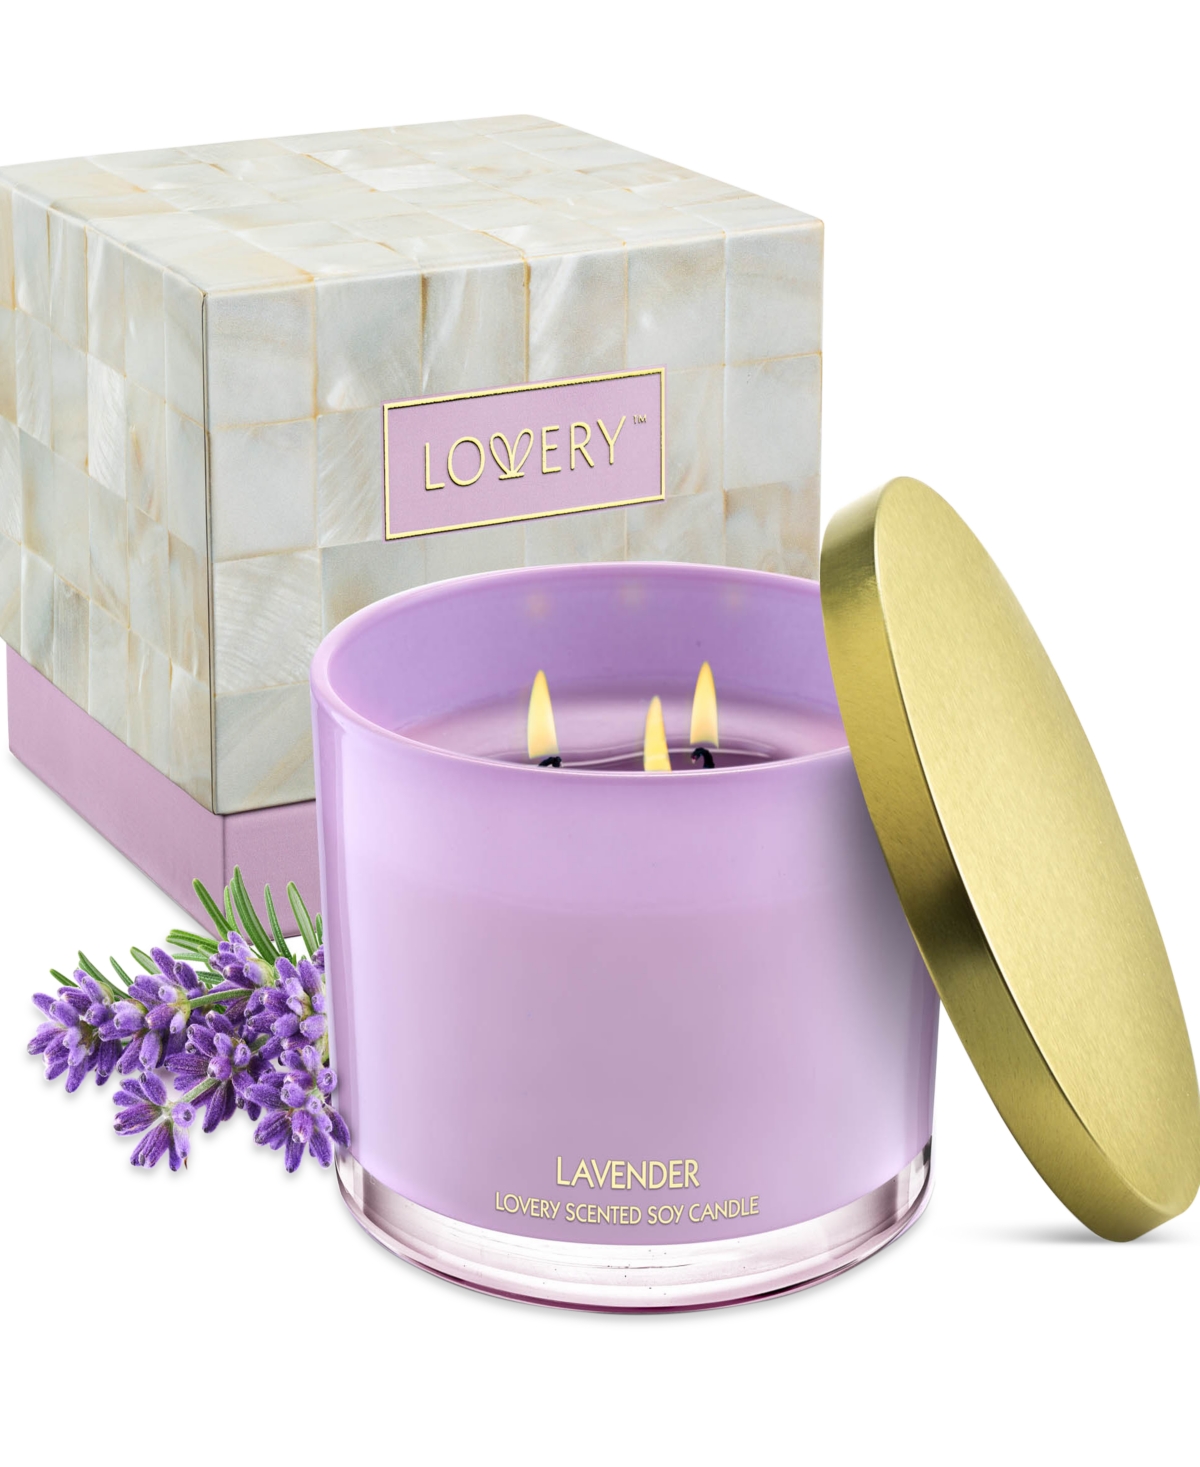 Lavender 3-Wick Soy Candle, 13 oz.